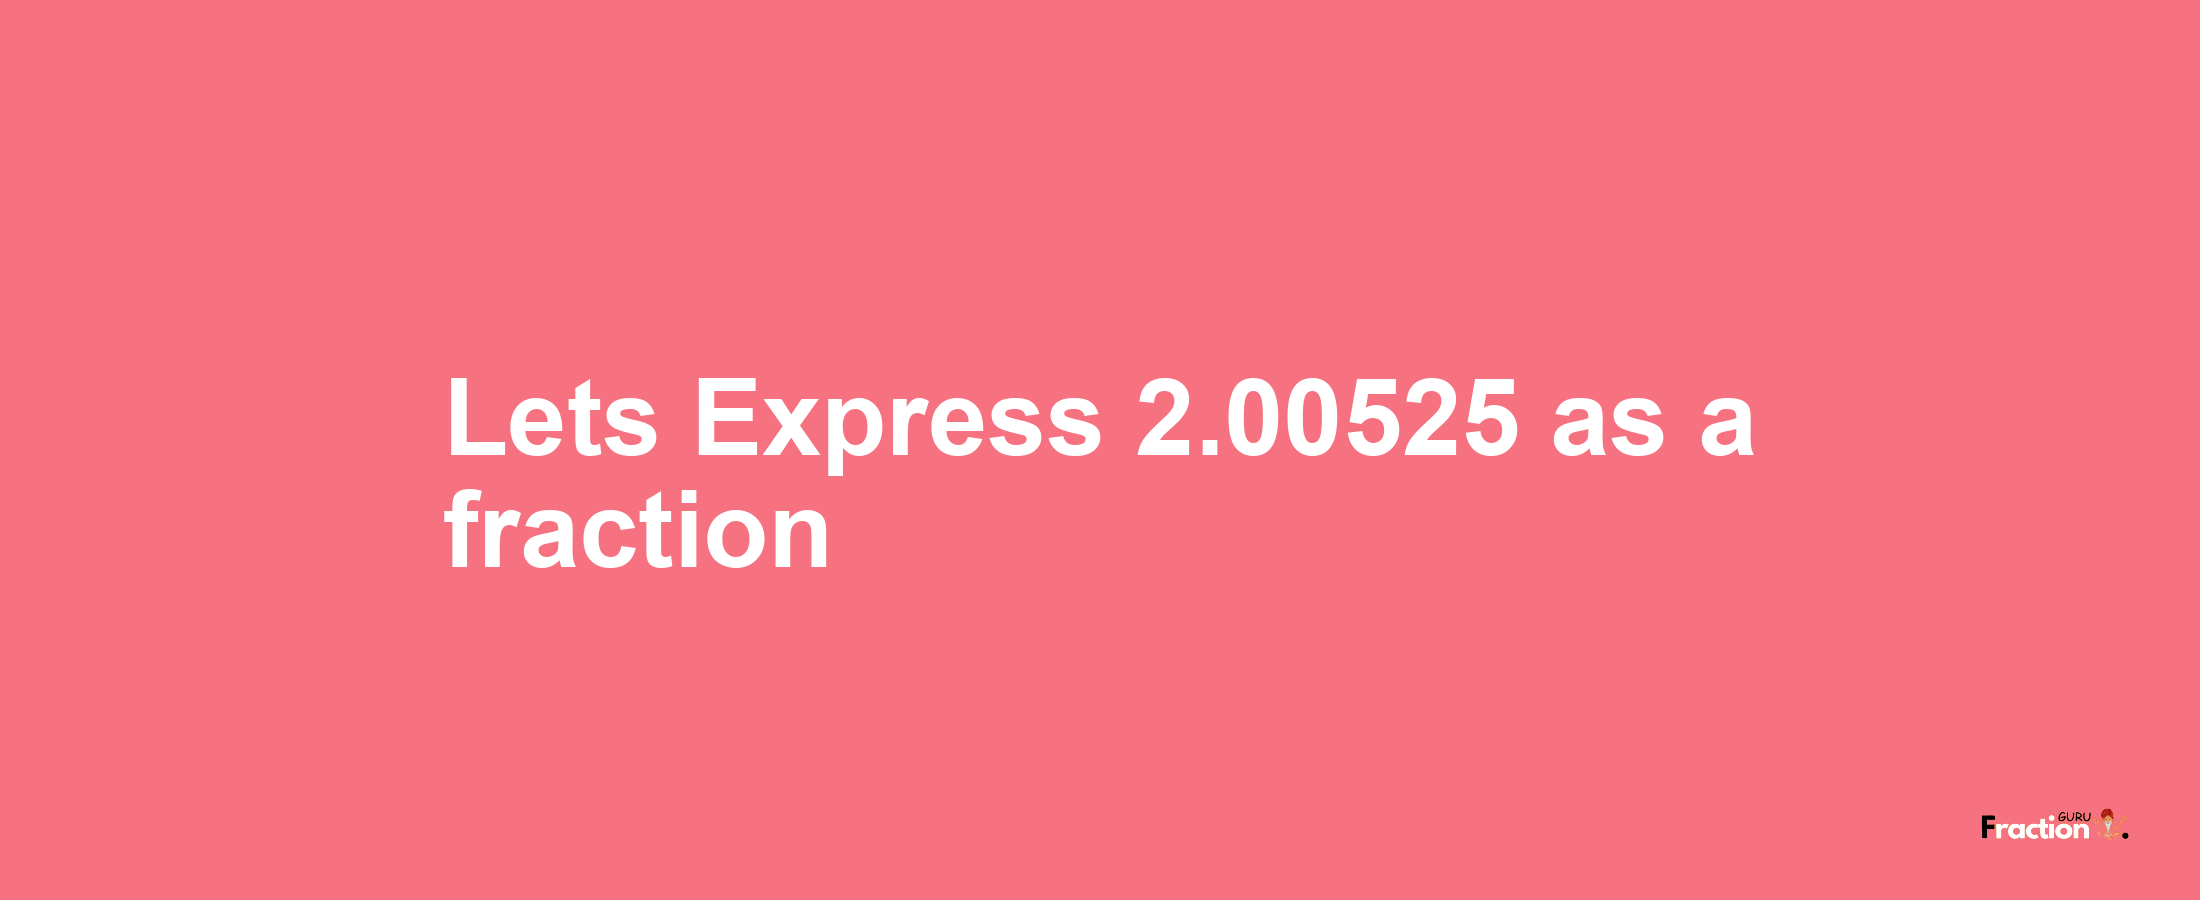 Lets Express 2.00525 as afraction